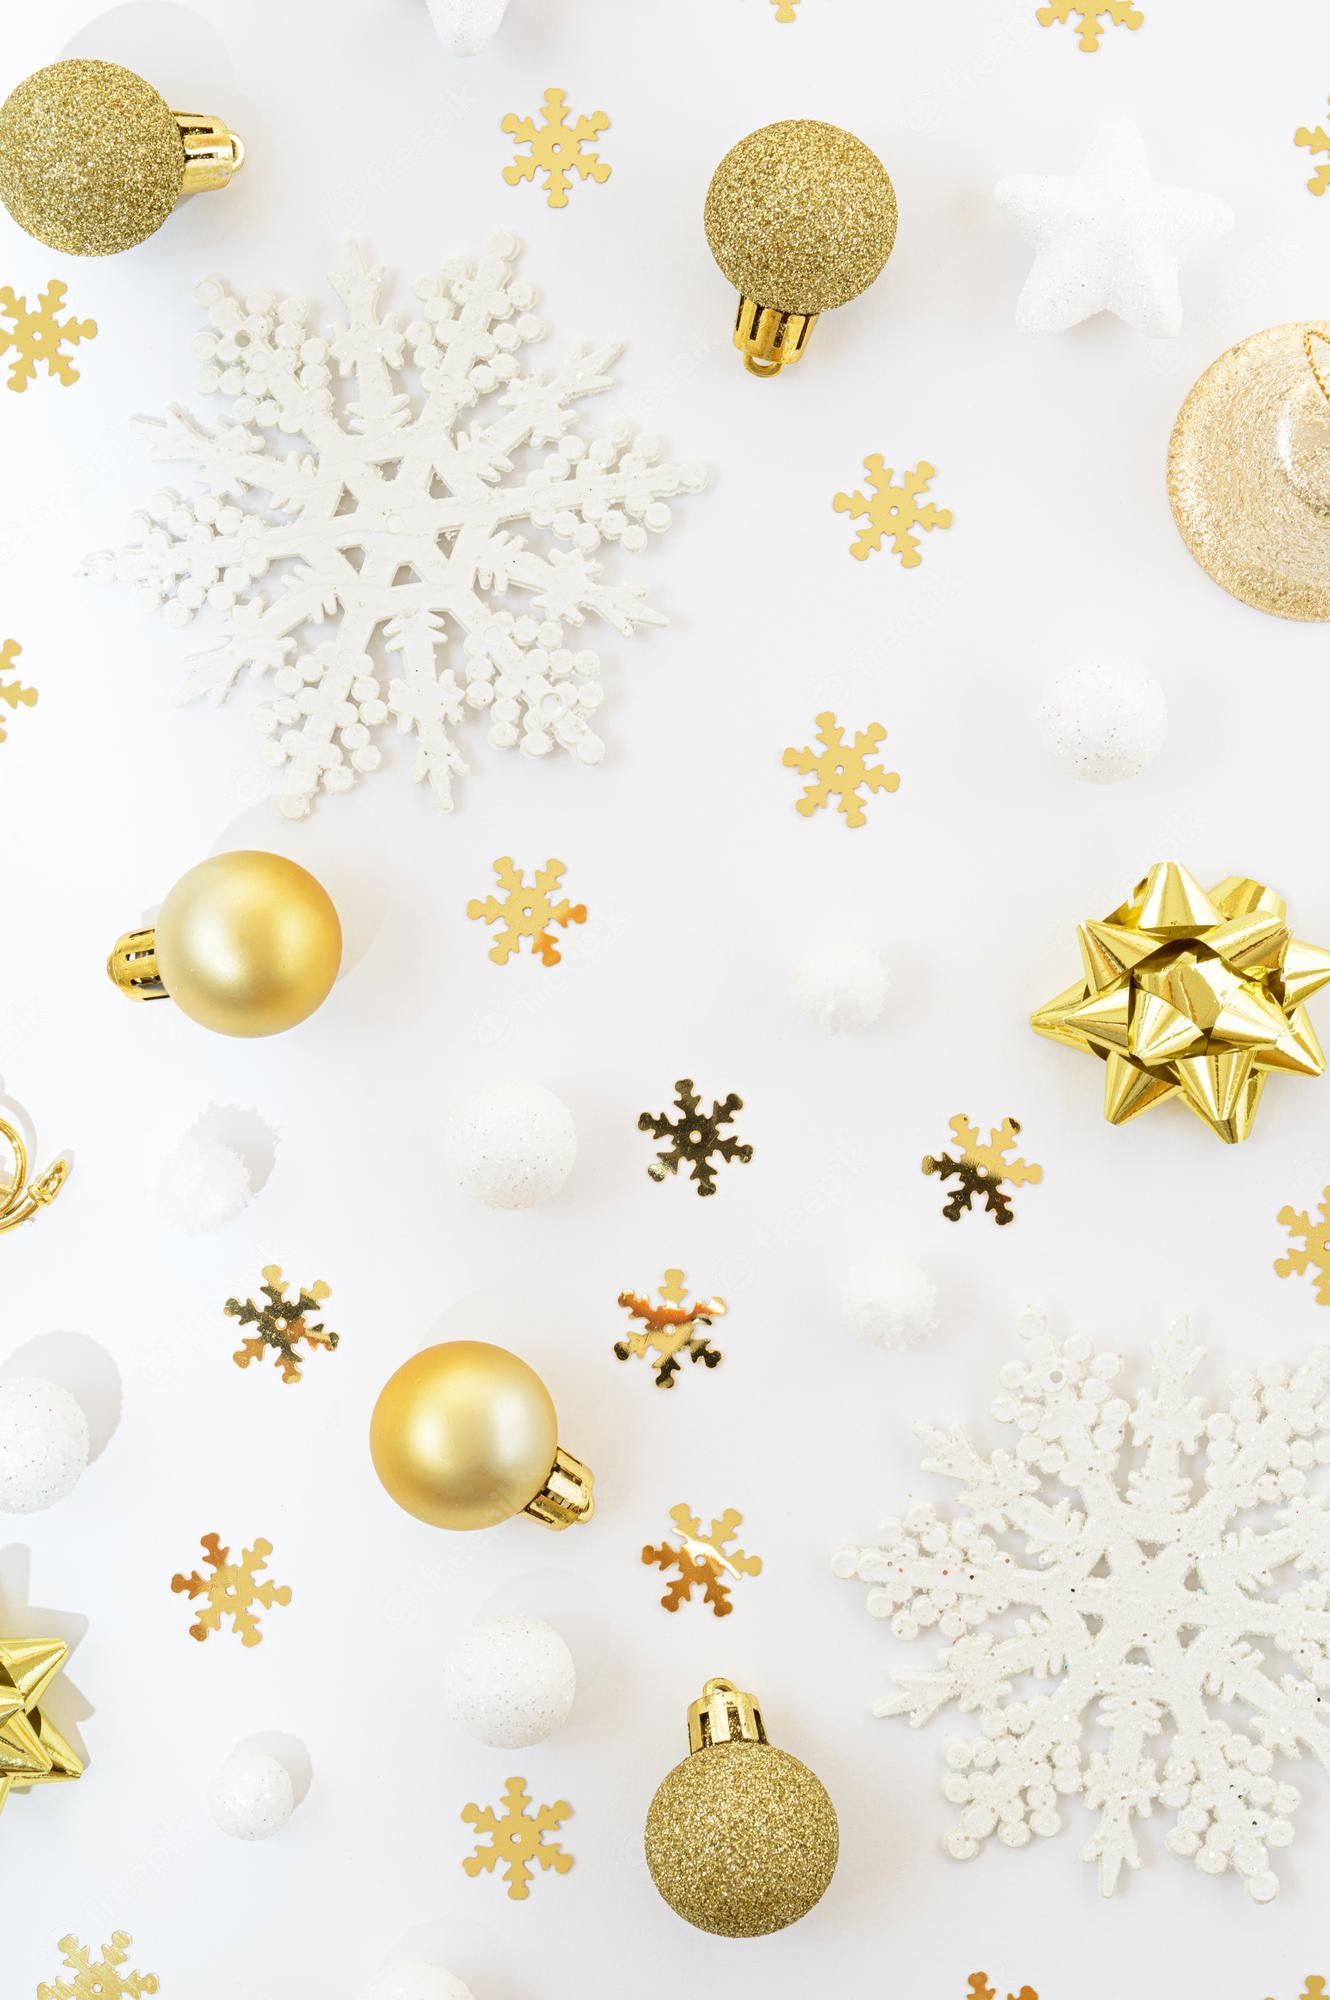 Premium Photo. Gold and white christmas ornament background. aesthetic gold wallpaper